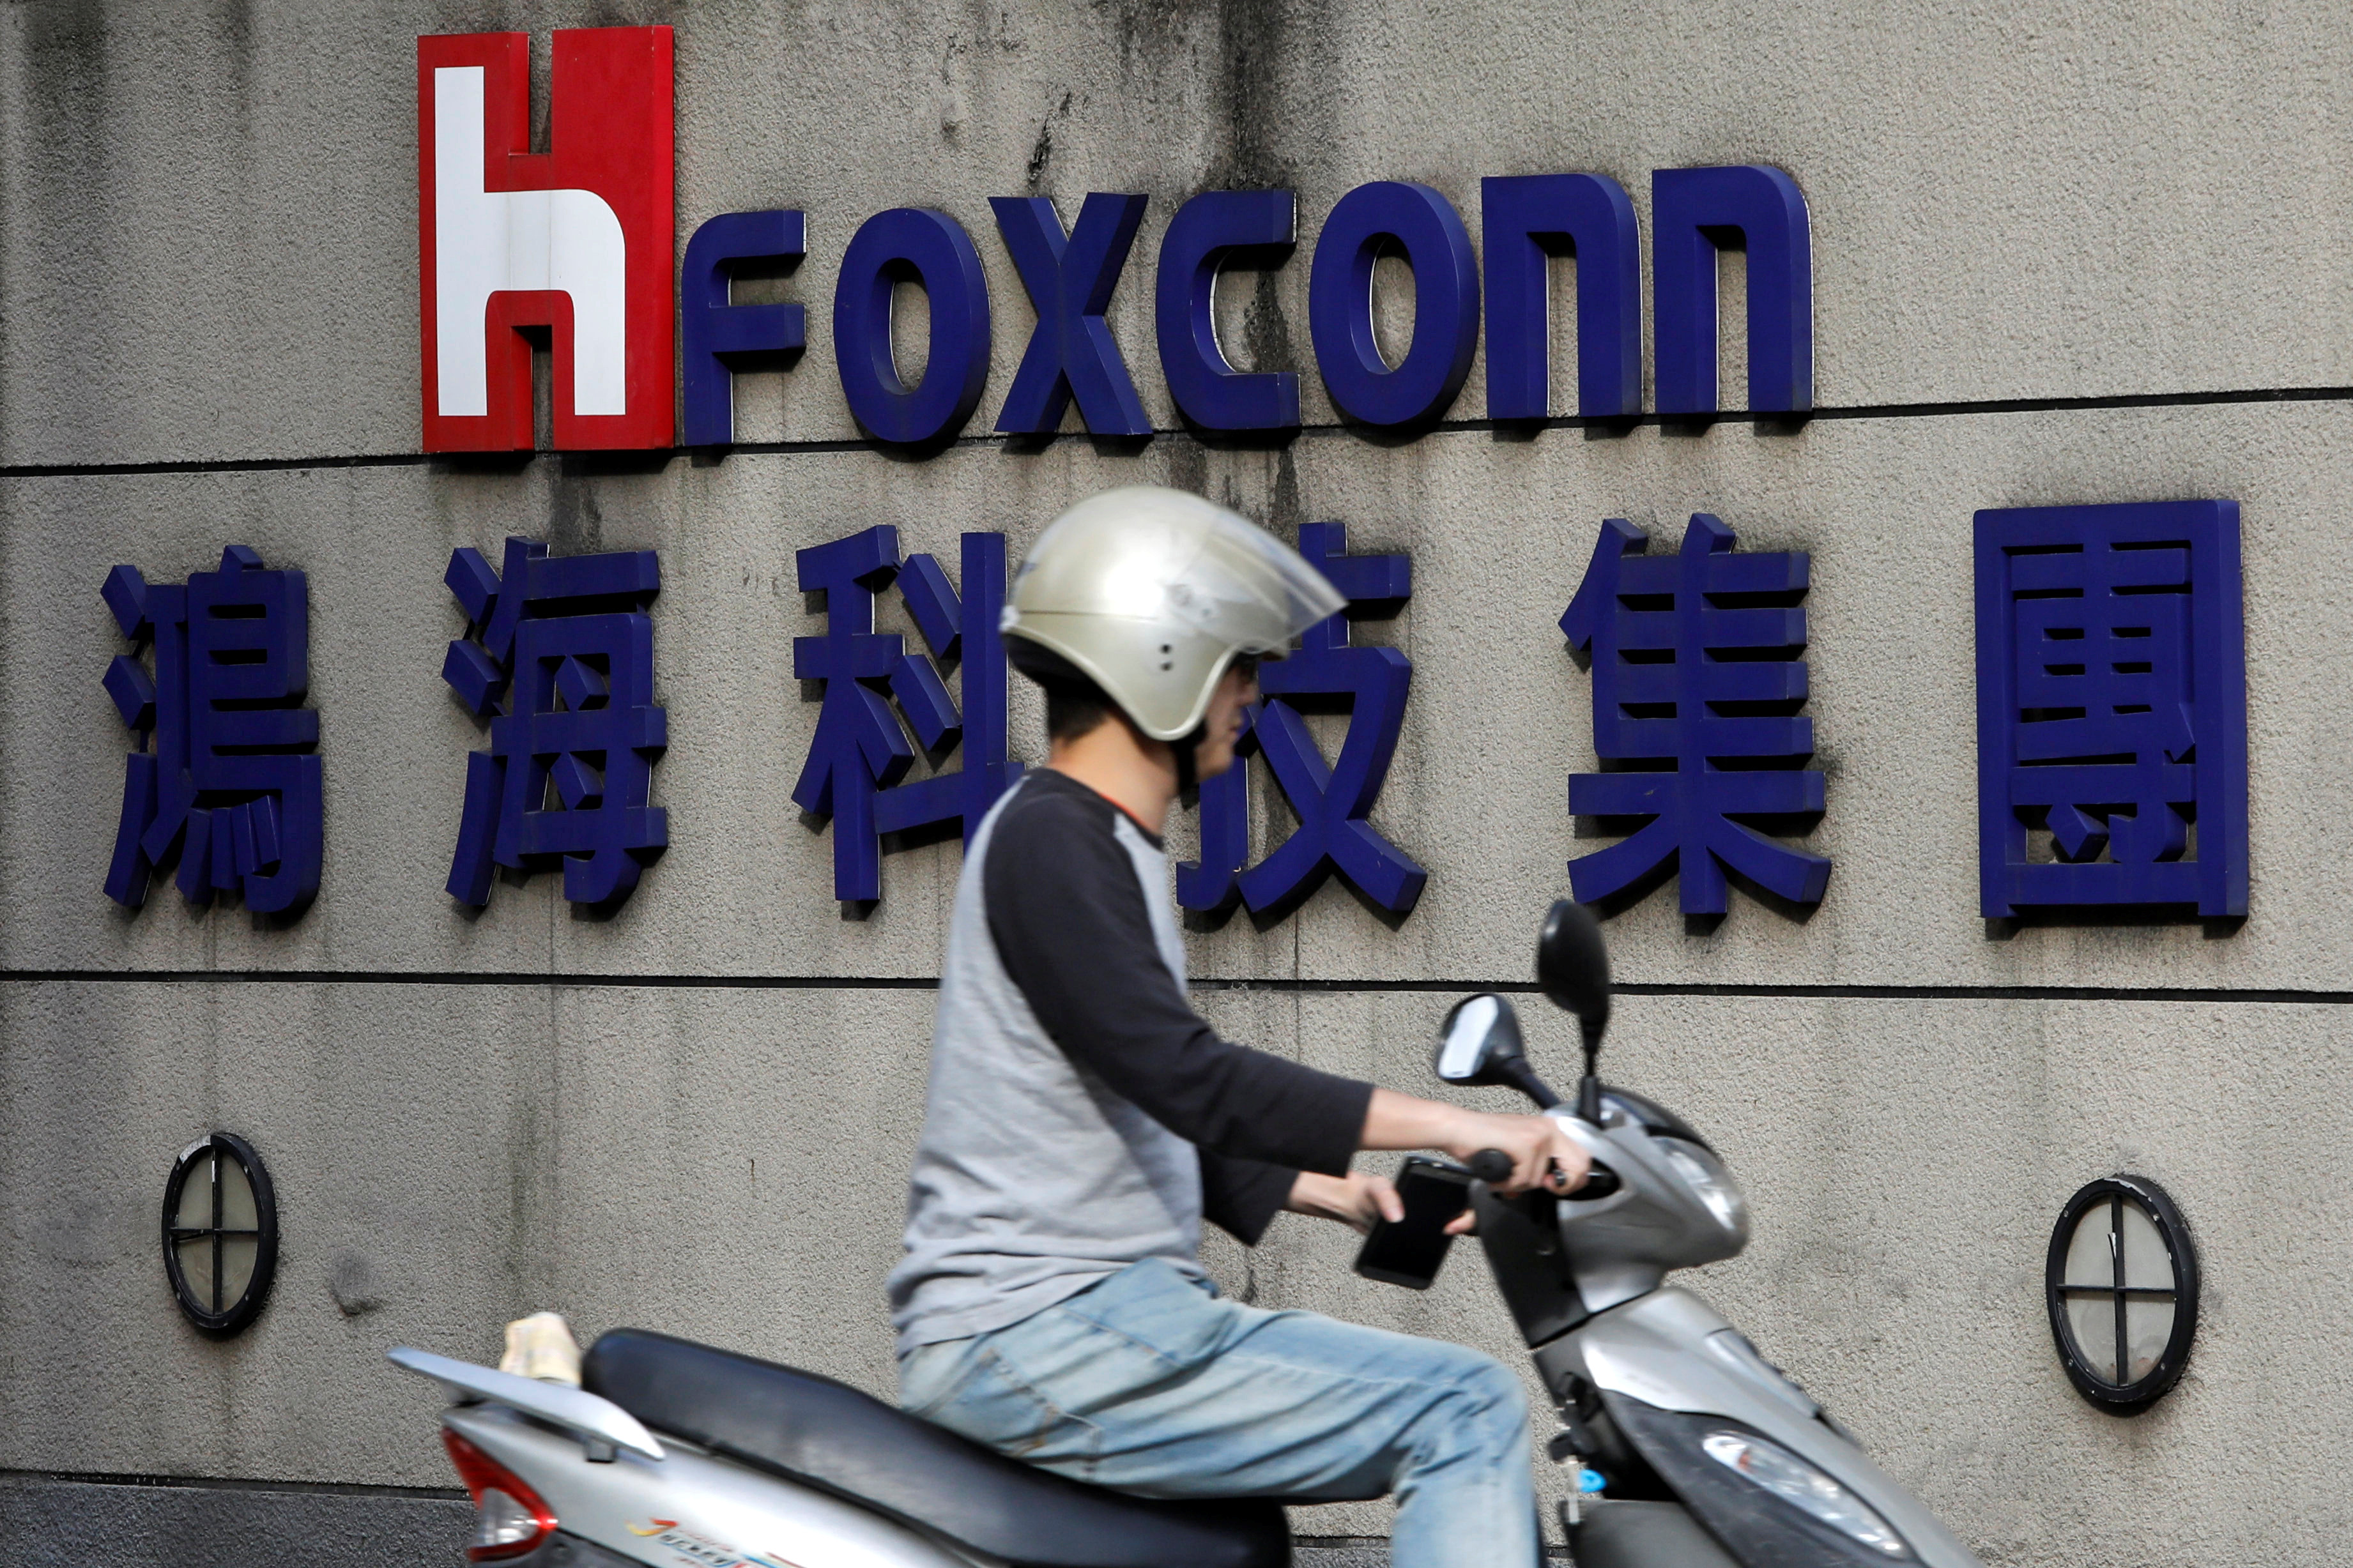 A motorcyclist rides past the logo of Foxconn, the trading name of Hon Hai Precision Industry, in Taipei